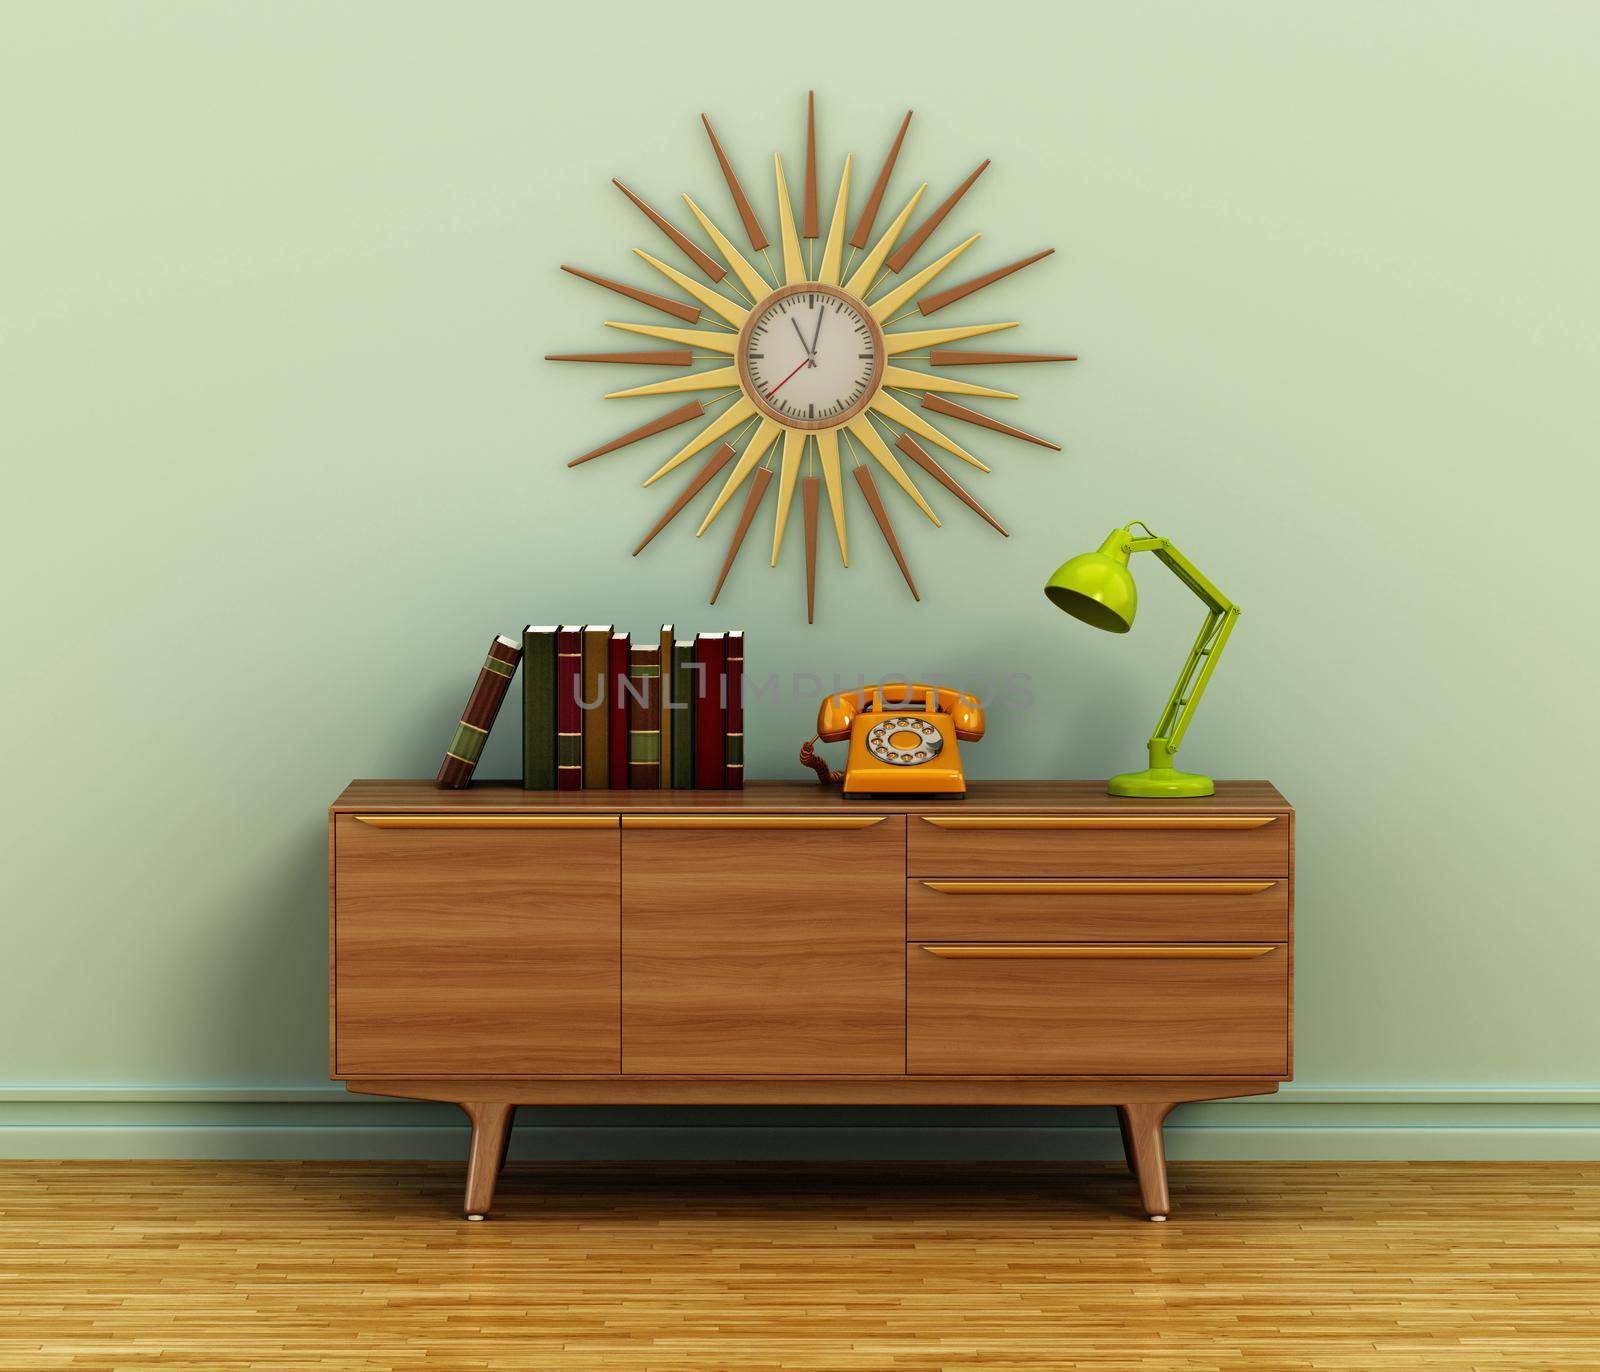 Dial phone, books and desk lamp on vintage style buffet table. 3D illustration.